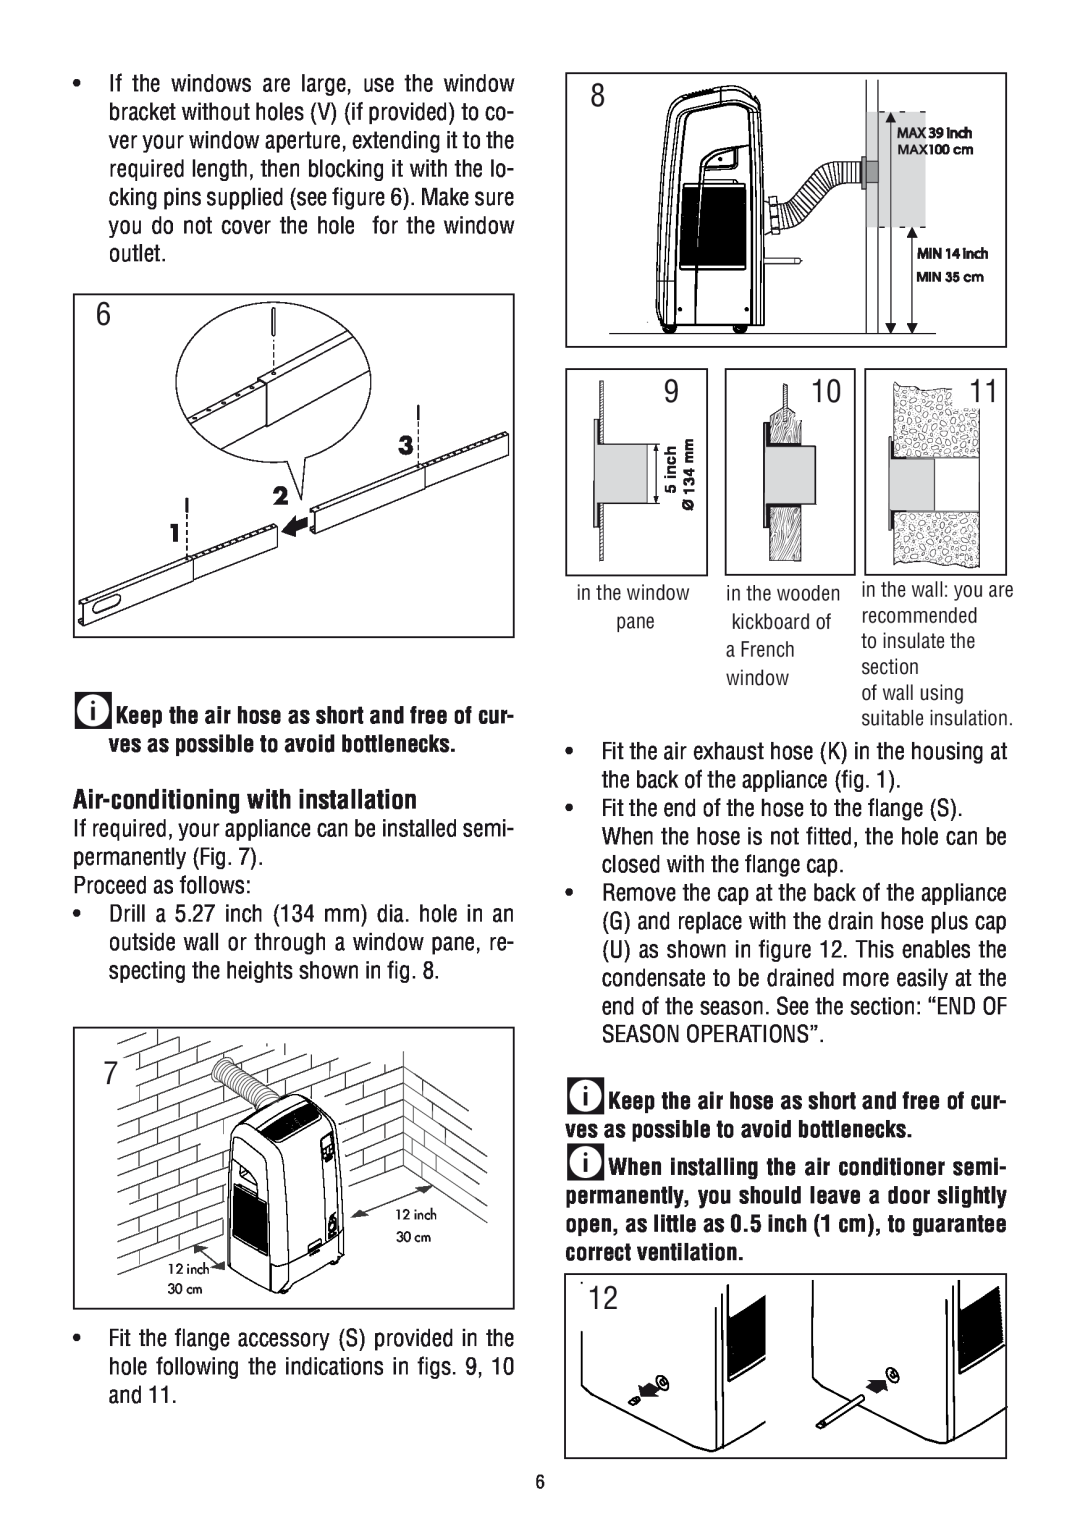 DeLonghi PAC WE 110 Air-conditioningwith installation, Proceed as follows, Remove the cap at the back of the appliance 